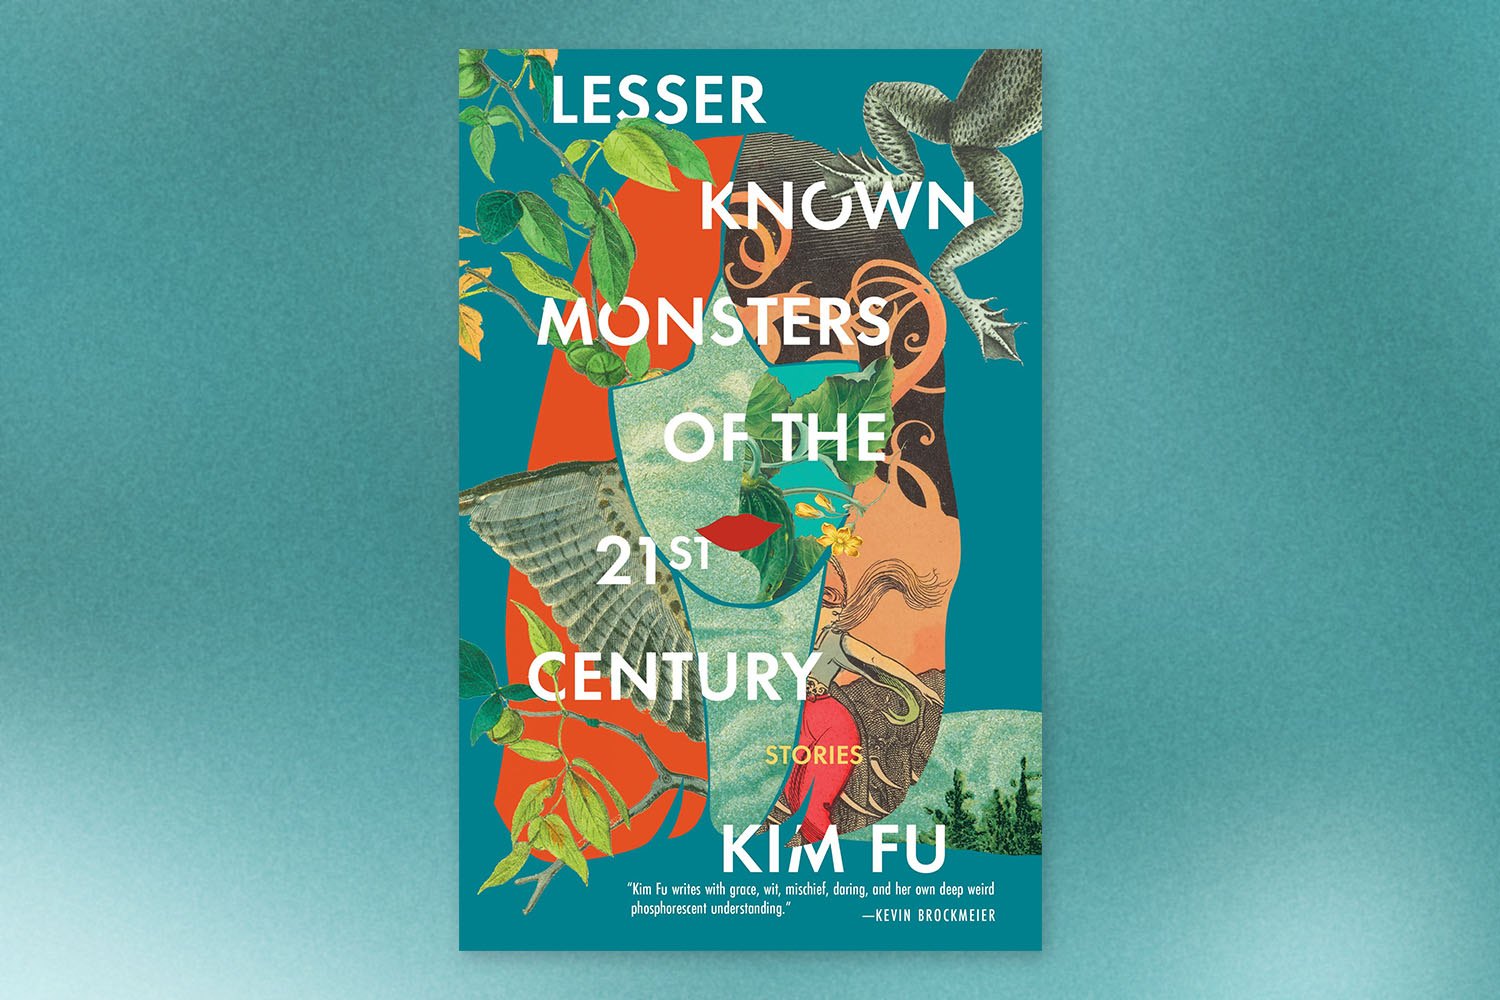 Lesser Known Monsters of the 21st Century Book on blue background